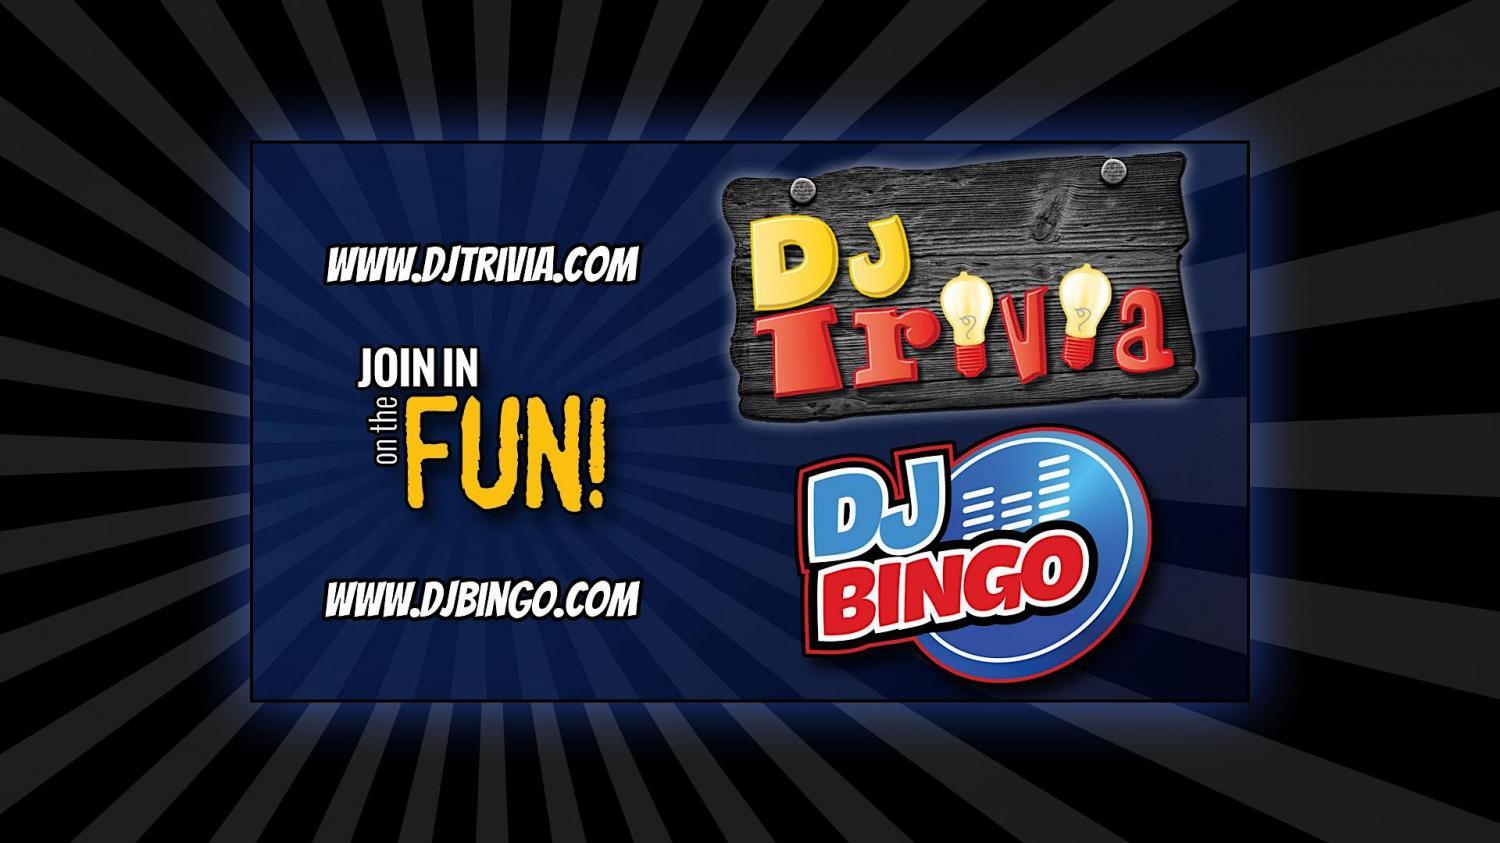 Play DJ Bingo FREE In Leesburg at Great Chicago Fire Brewery & Tap Room